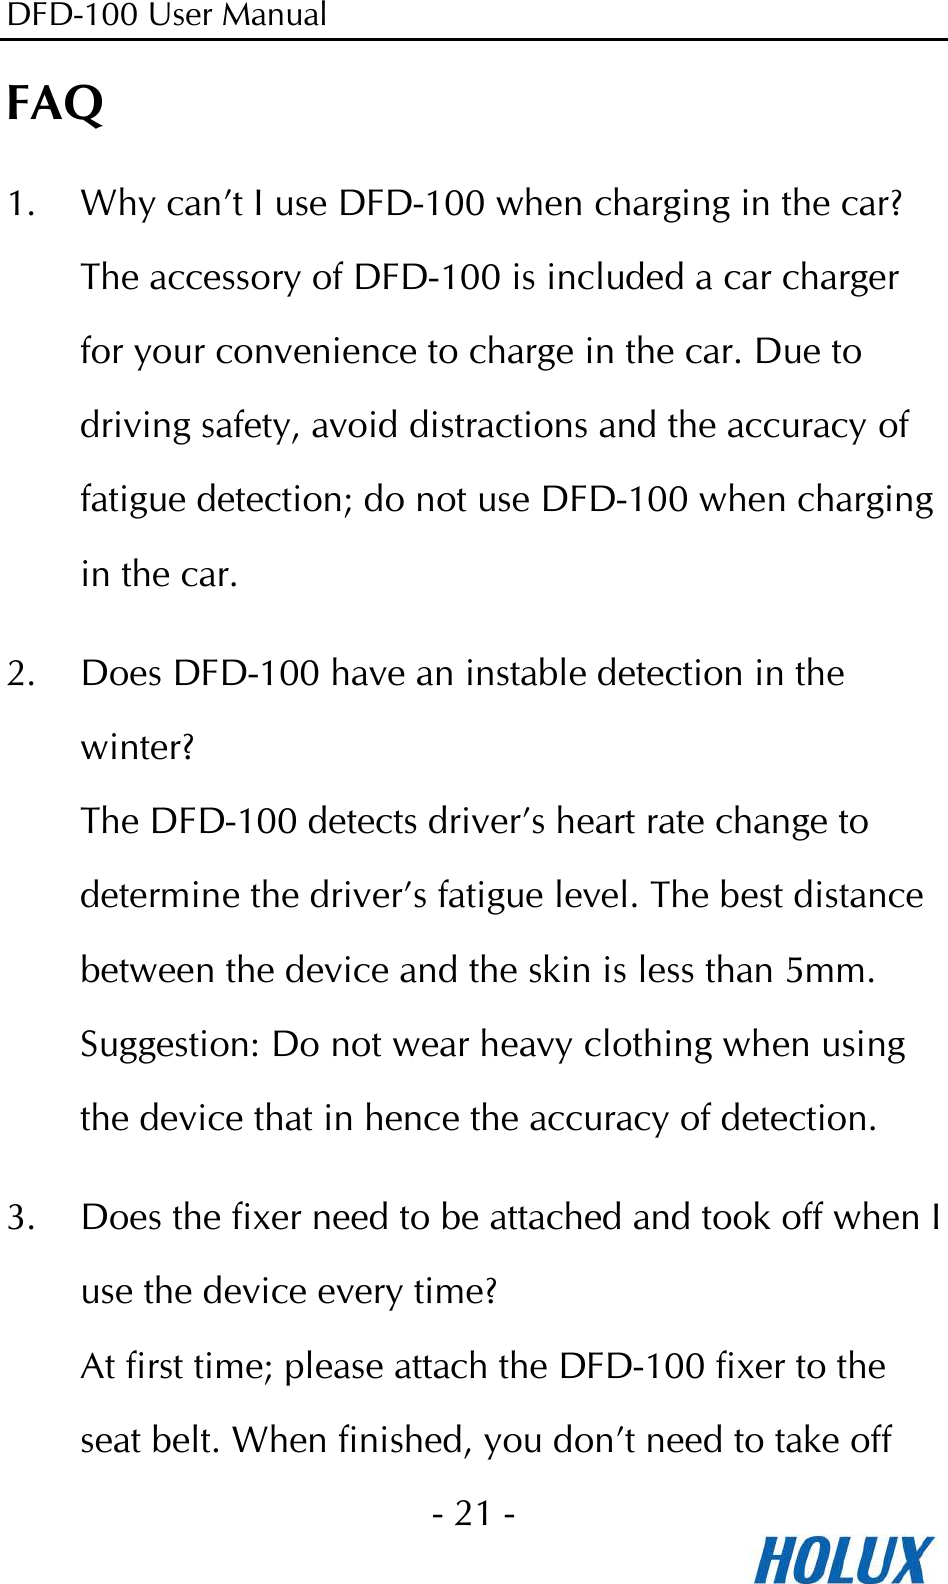 DFD-100 User Manual - 21 -  FAQ 1. Why can’t I use DFD-100 when charging in the car? The accessory of DFD-100 is included a car charger for your convenience to charge in the car. Due to driving safety, avoid distractions and the accuracy of fatigue detection; do not use DFD-100 when charging in the car. 2. Does DFD-100 have an instable detection in the winter? The DFD-100 detects driver’s heart rate change to determine the driver’s fatigue level. The best distance between the device and the skin is less than 5mm.   Suggestion: Do not wear heavy clothing when using the device that in hence the accuracy of detection. 3. Does the fixer need to be attached and took off when I use the device every time? At first time; please attach the DFD-100 fixer to the seat belt. When finished, you don’t need to take off 